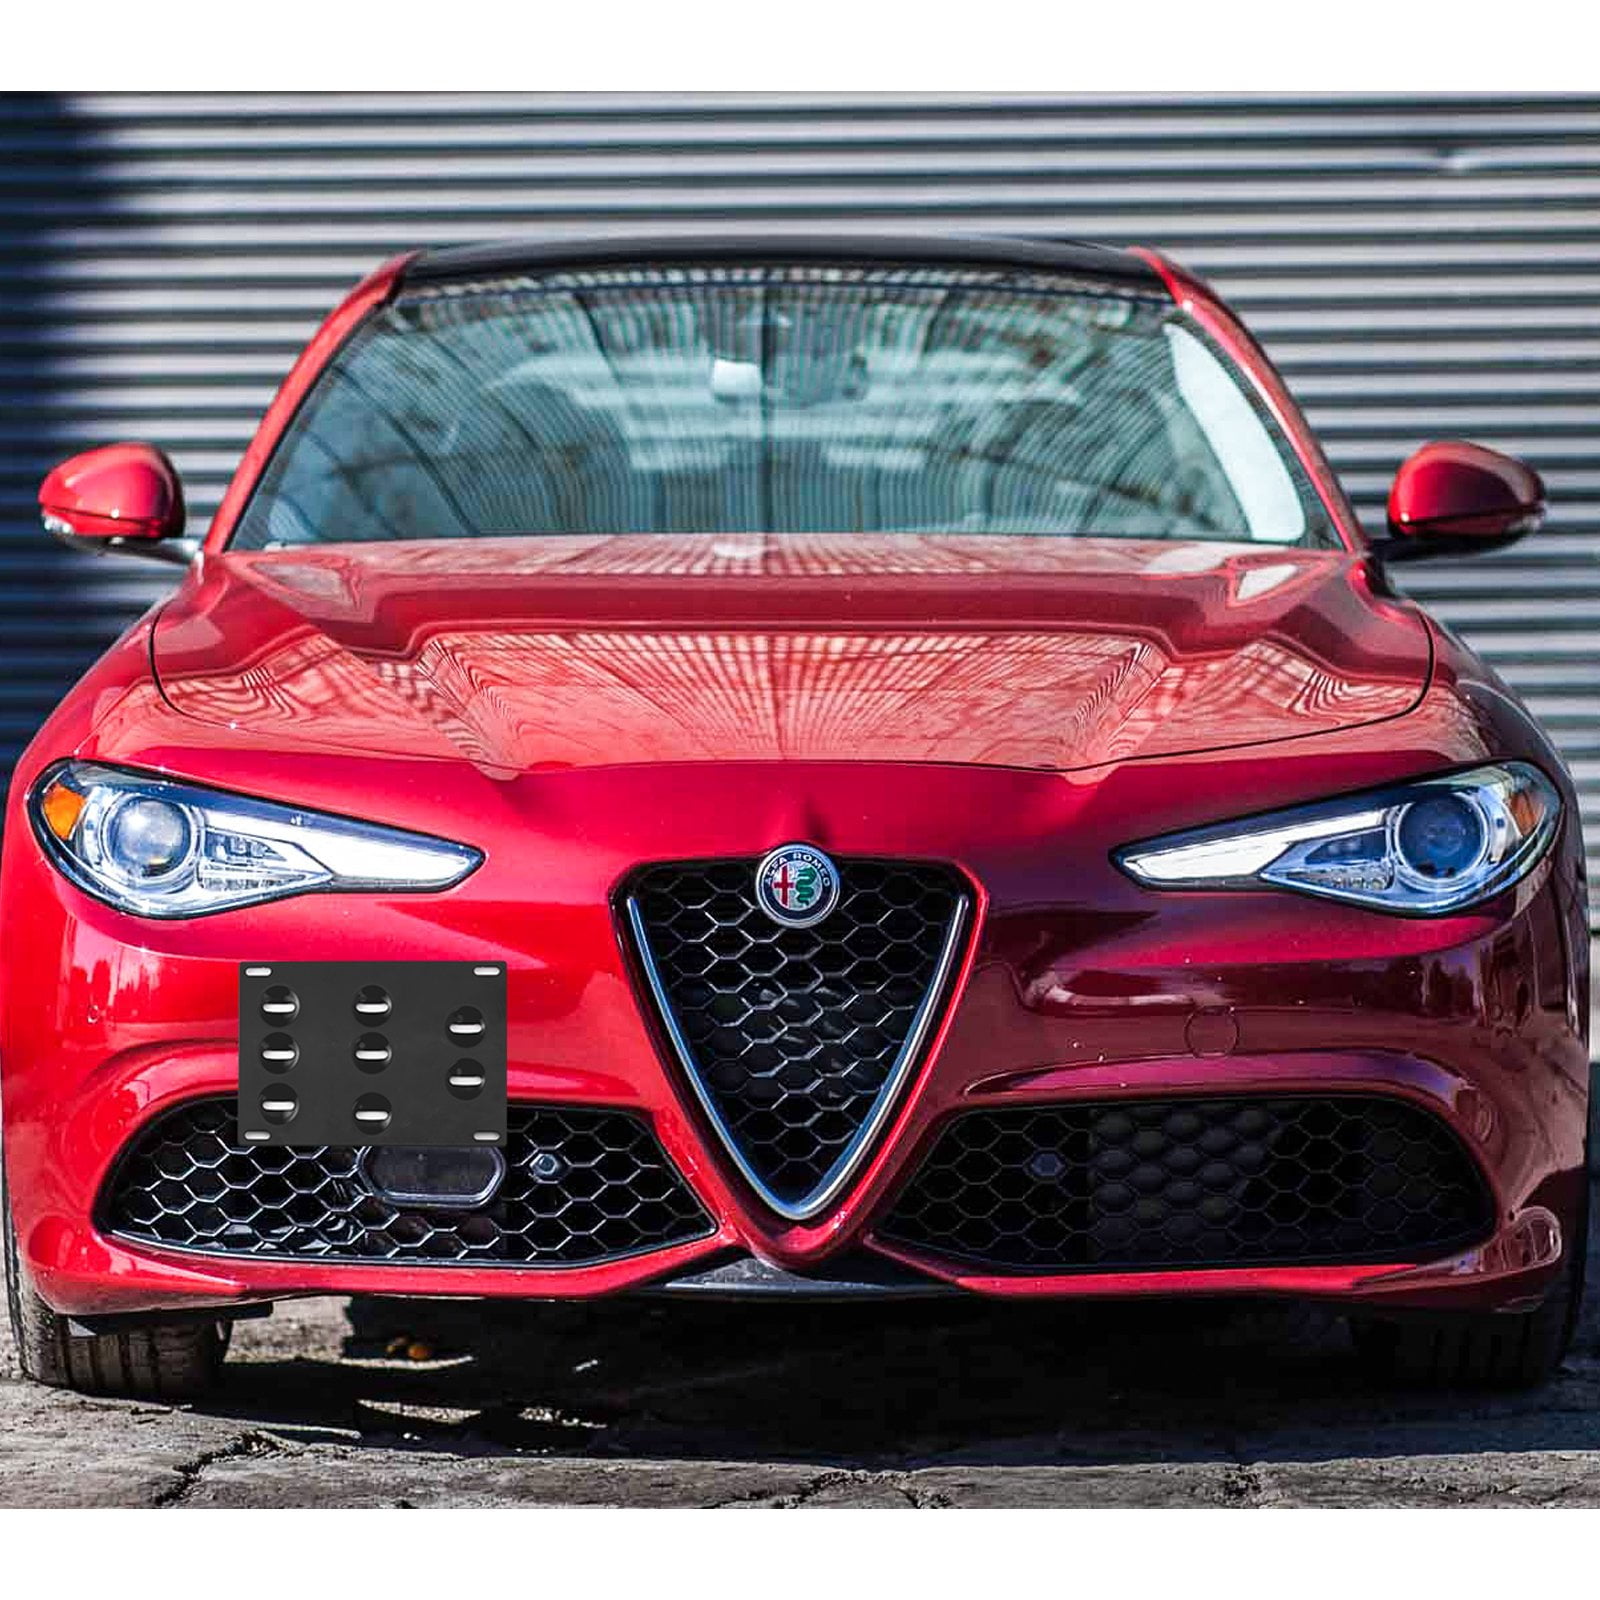 GMG Motorsports NO Holes License Plate Bracket Kit for The Alfa Romeo Giulia Models No Drill Tow Hook License Plate Mount 